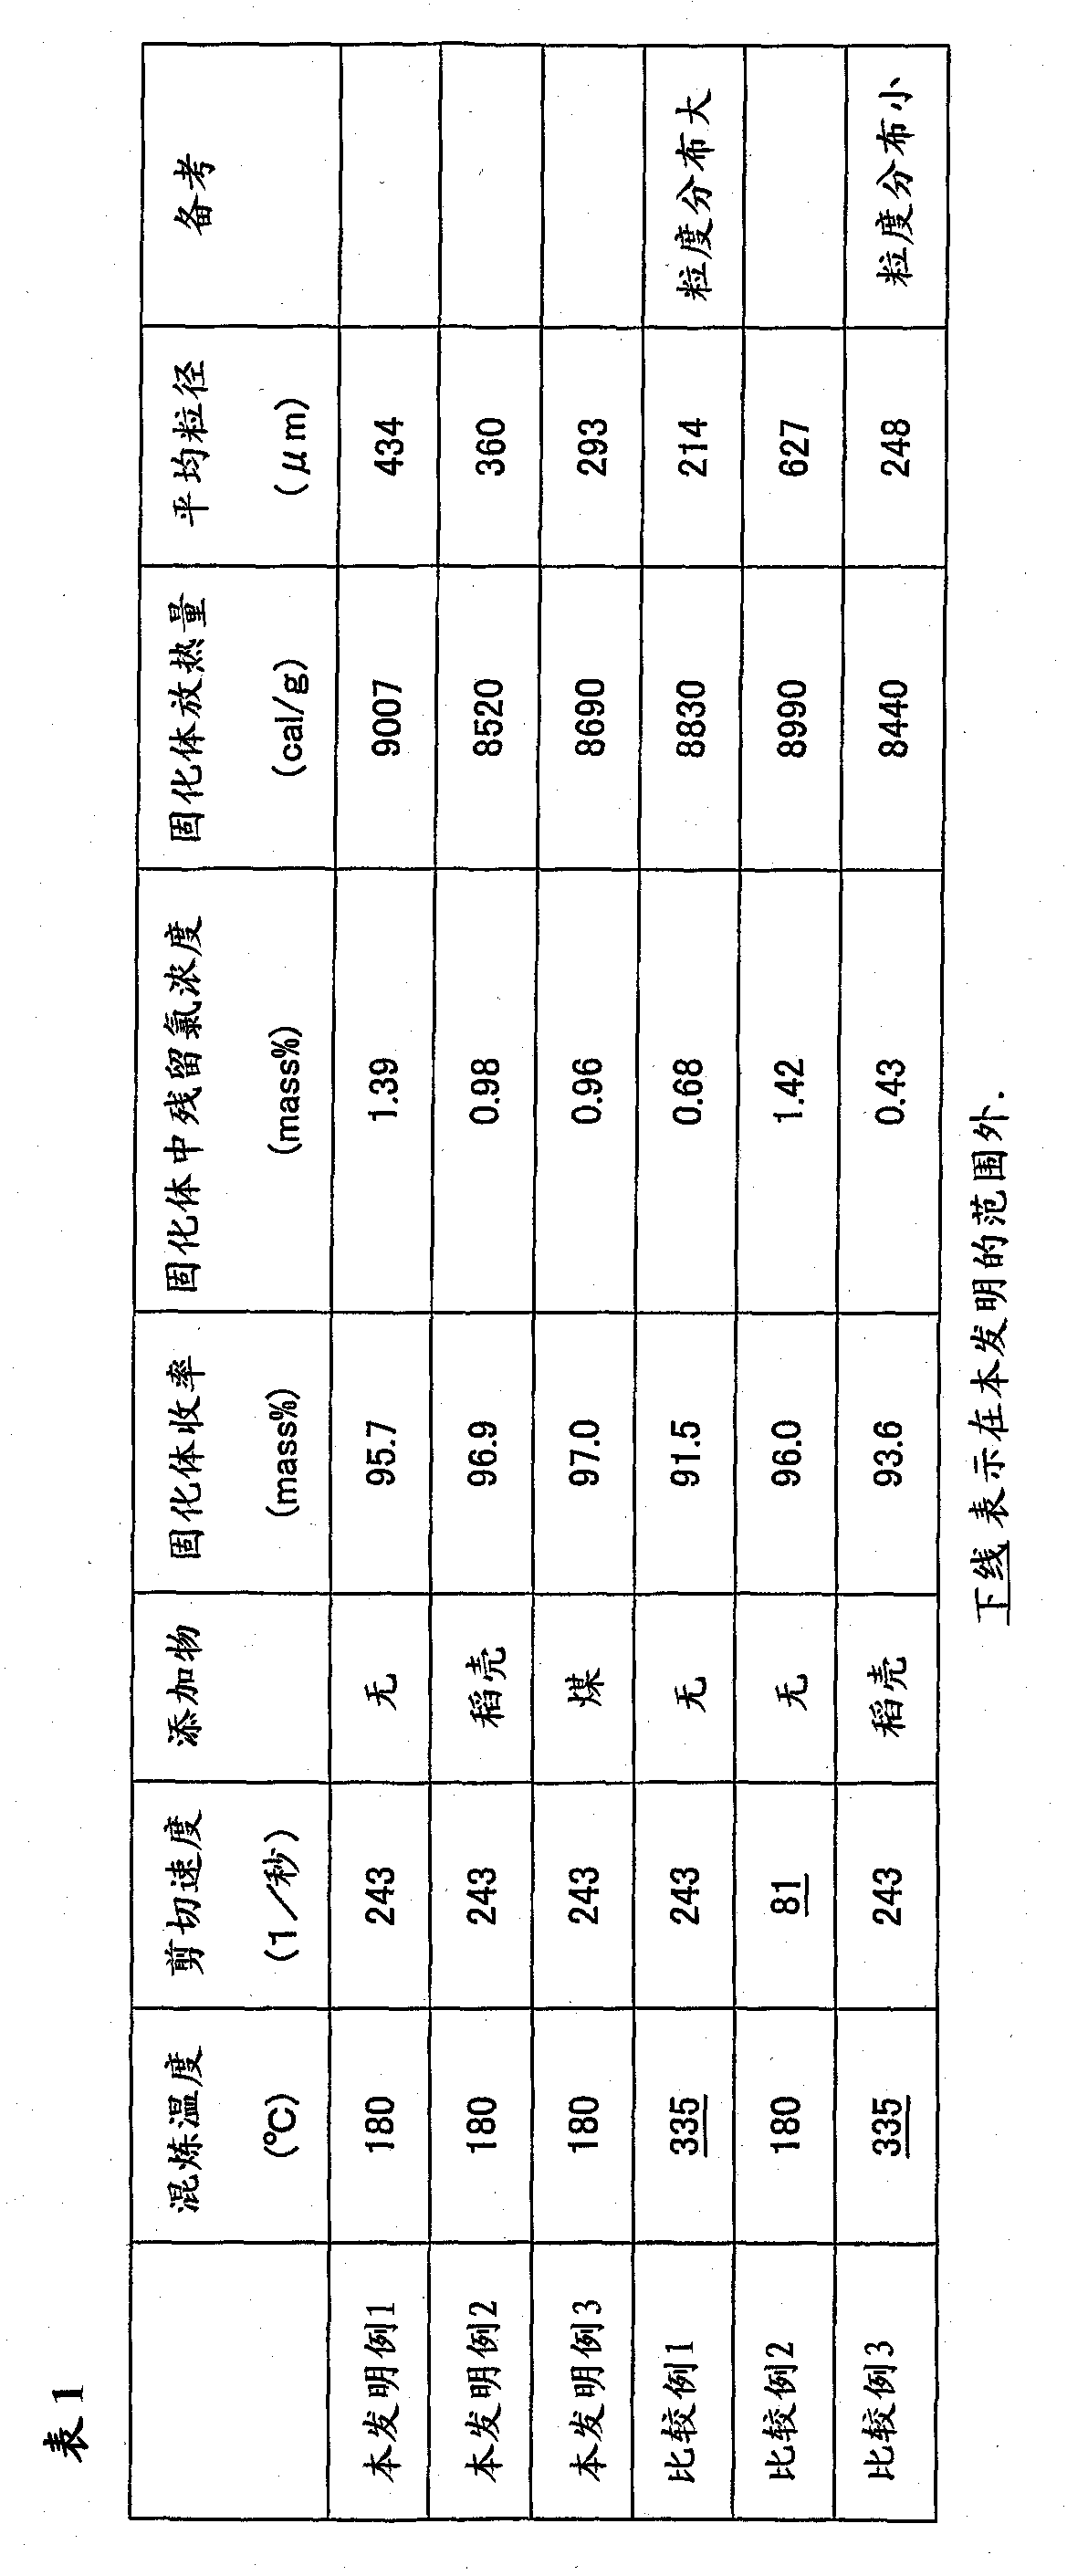 Method for producing pulverized waste plastic and solid fuel or mineral reduction material